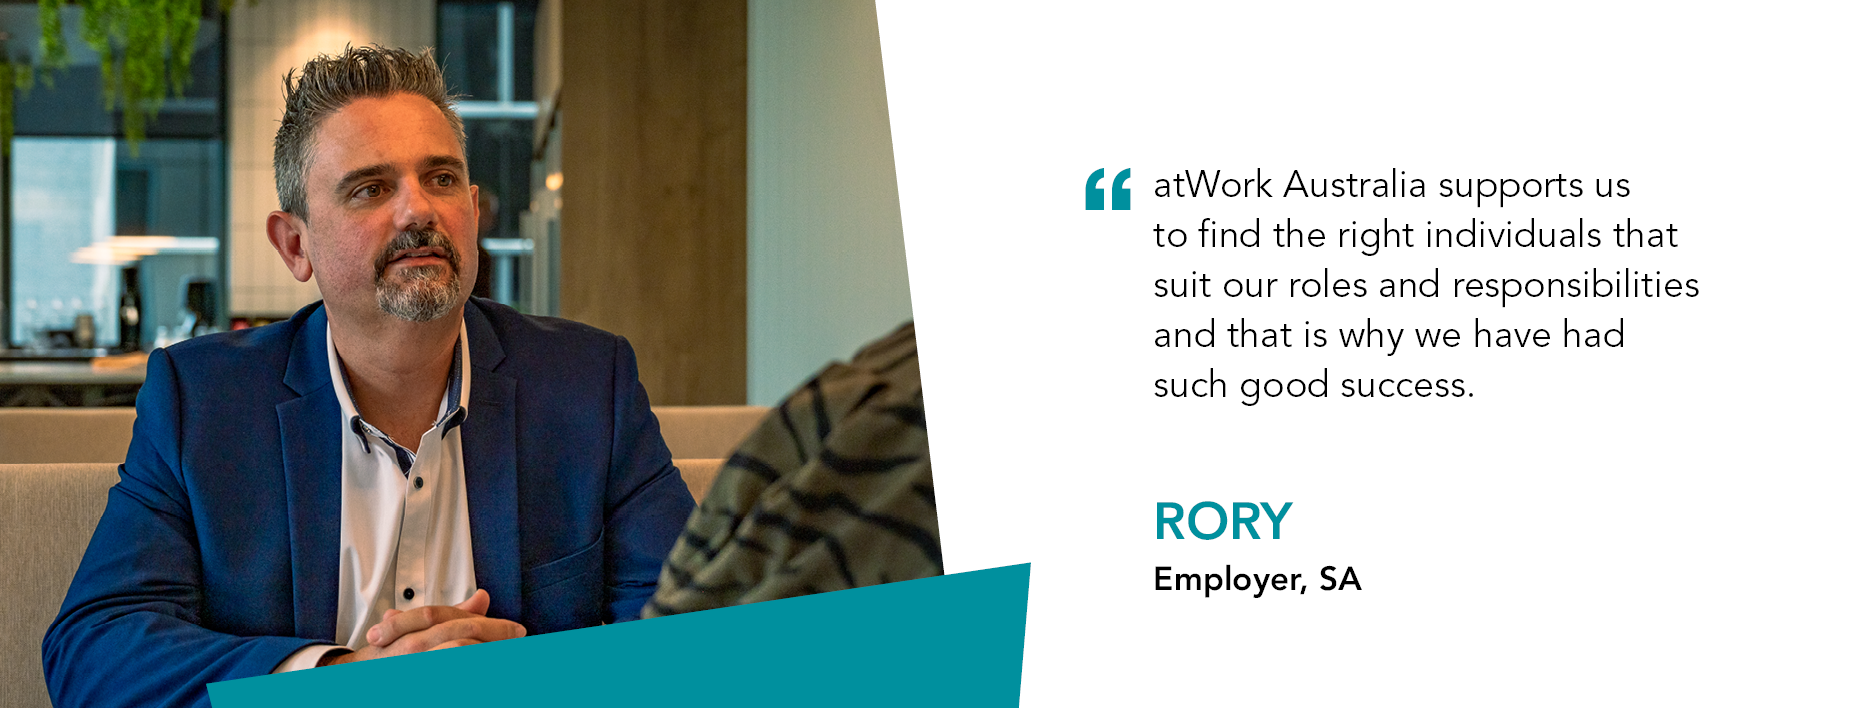 Business owner Rory says “atWork Australia supports us to find the right individuals that suit our roles and responsibilities and that is why we have had such good success,”